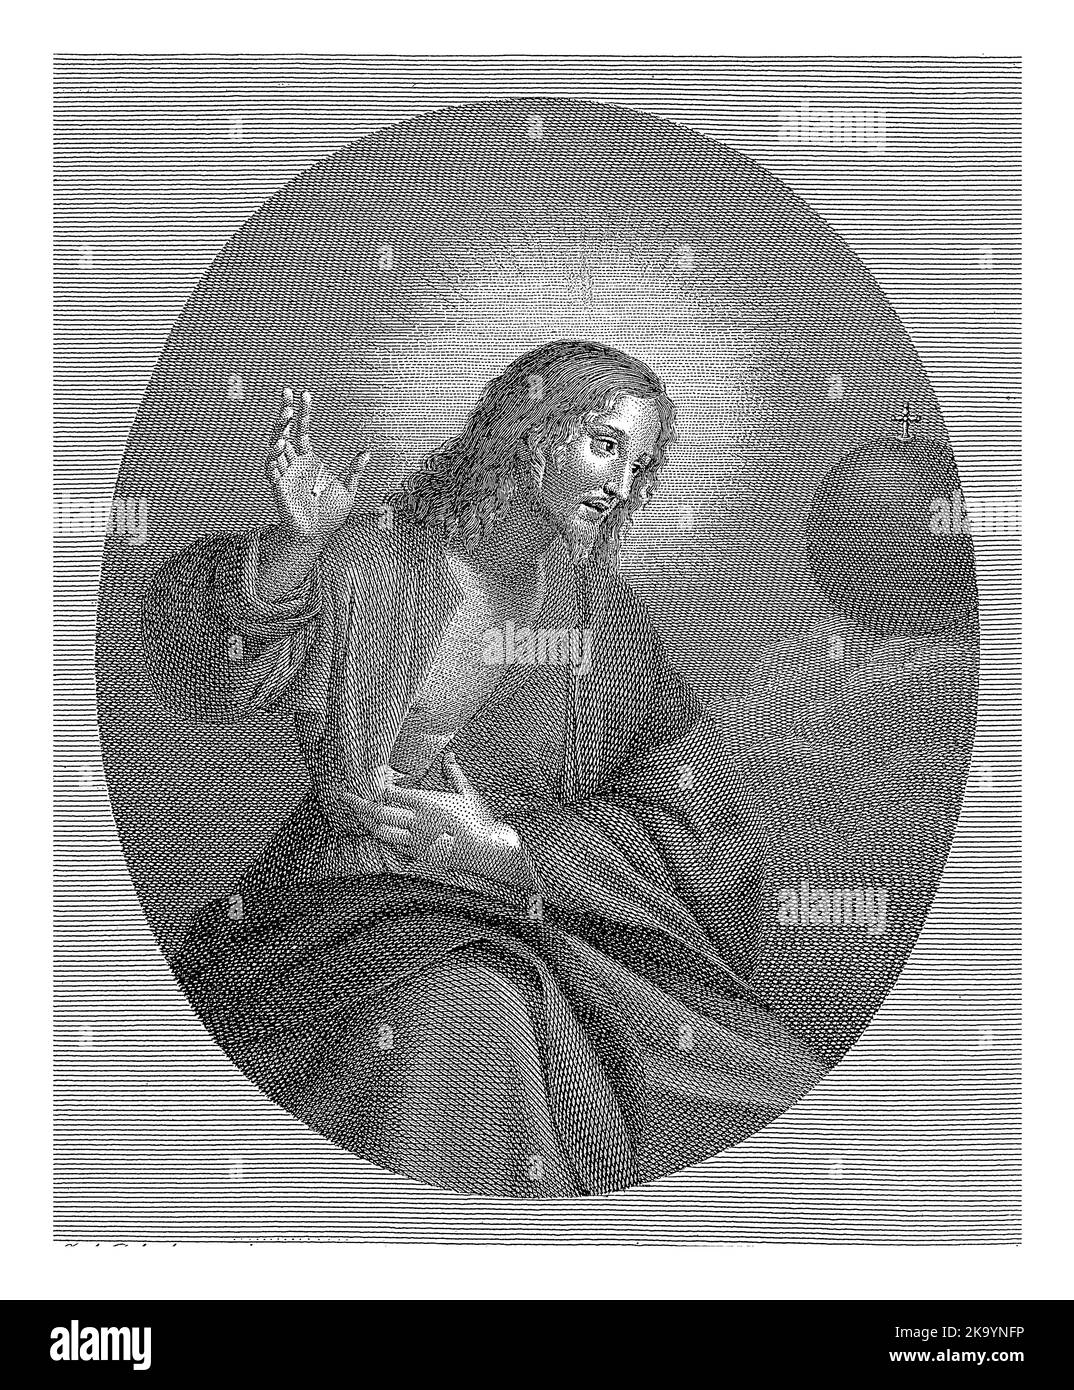 christ shows the stigmata in his hands and his side wound he is looking at a globe with a cross 2K9YNFP